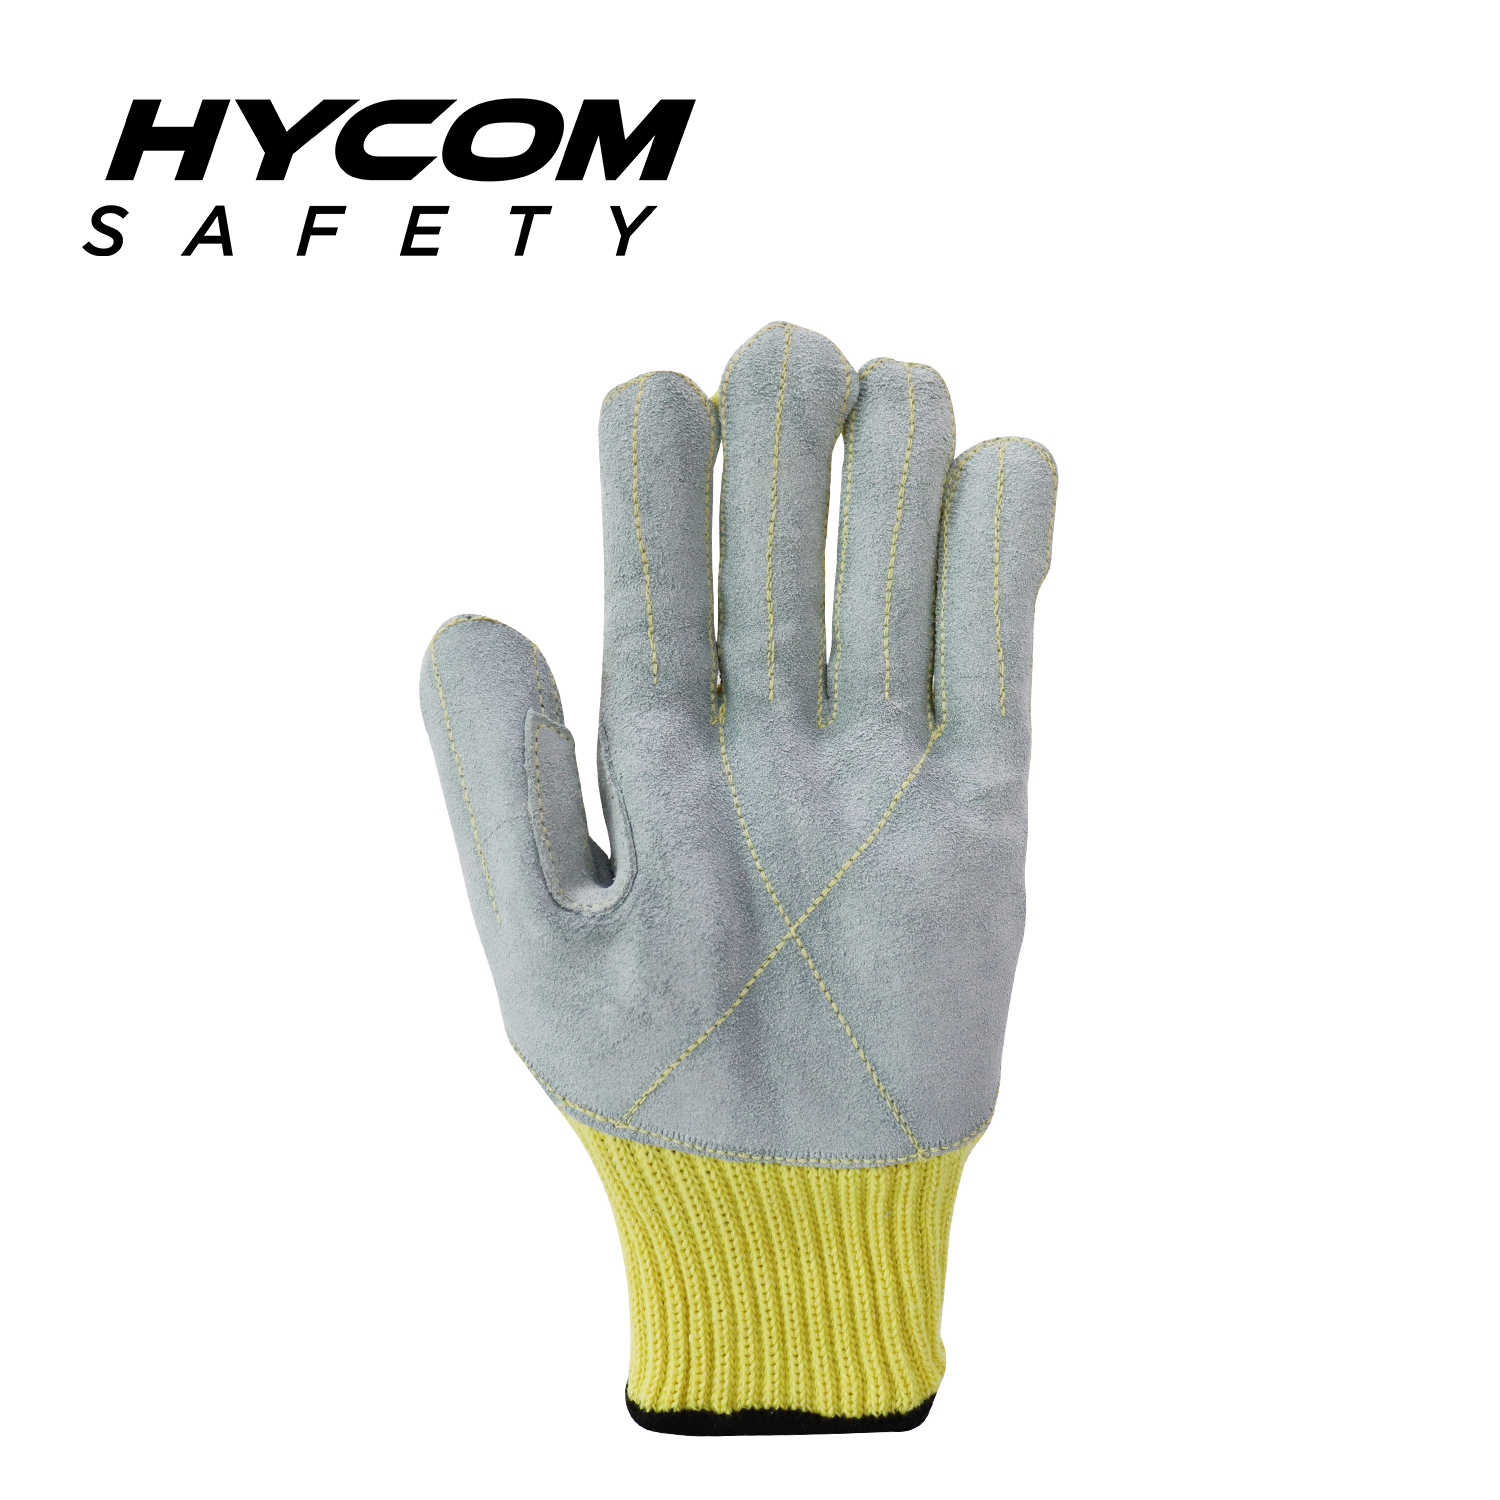 HYCOM 7G ANSI 2 Cut level 3 Aramid Cut Resistant Gloves with 100% cowhide leather palm